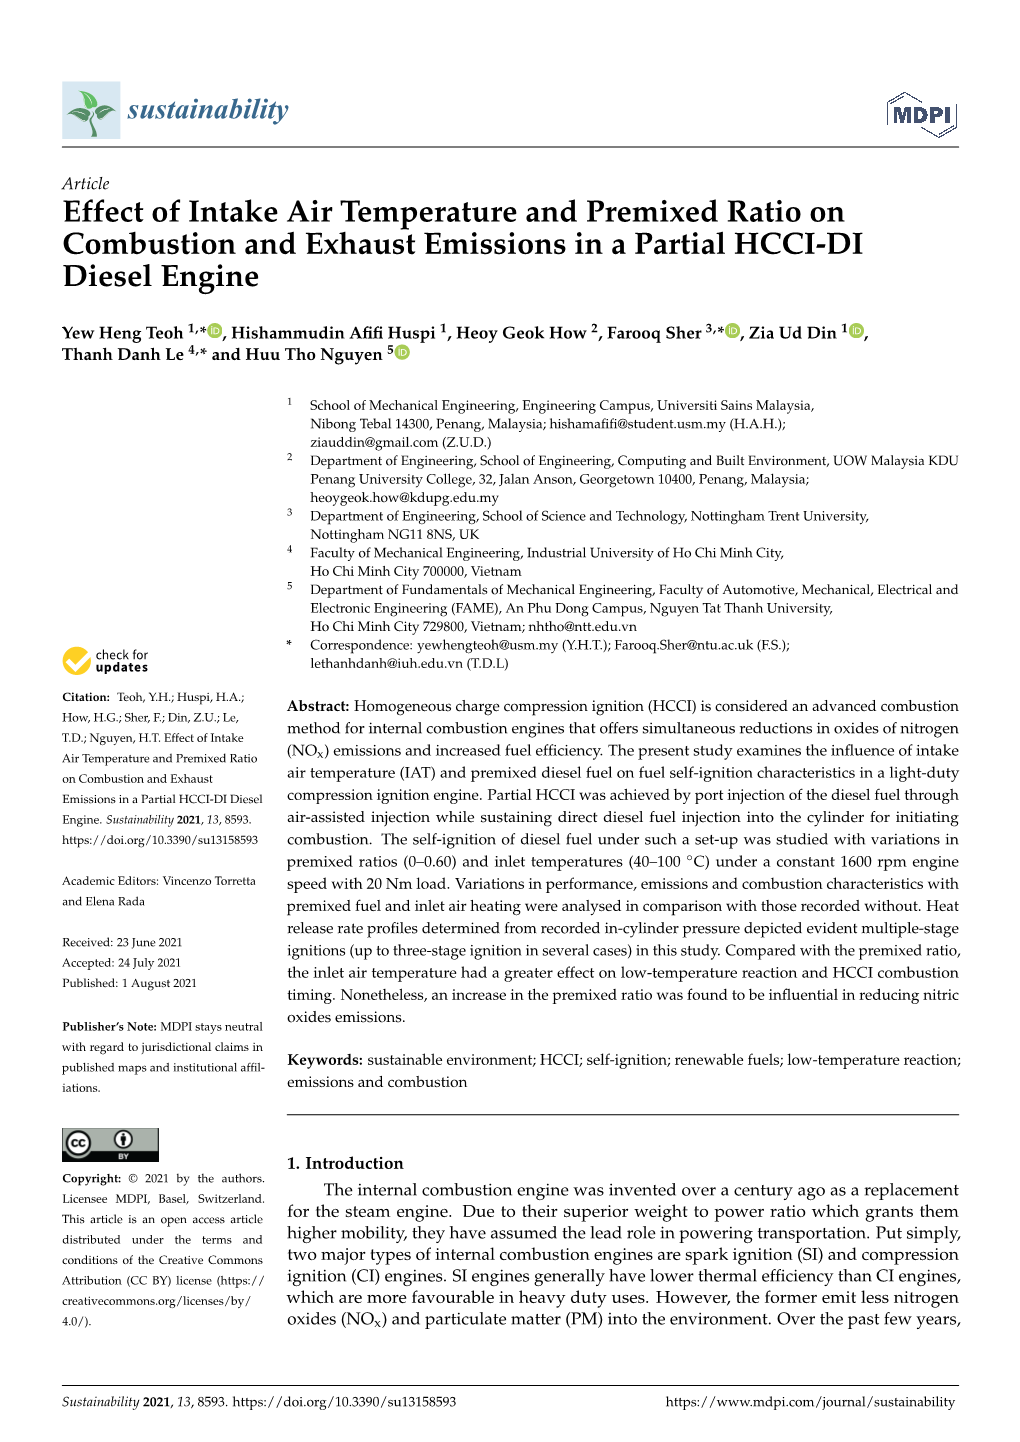 Effect of Intake Air Temperature and Premixed Ratio on Combustion and Exhaust Emissions in a Partial HCCI-DI Diesel Engine